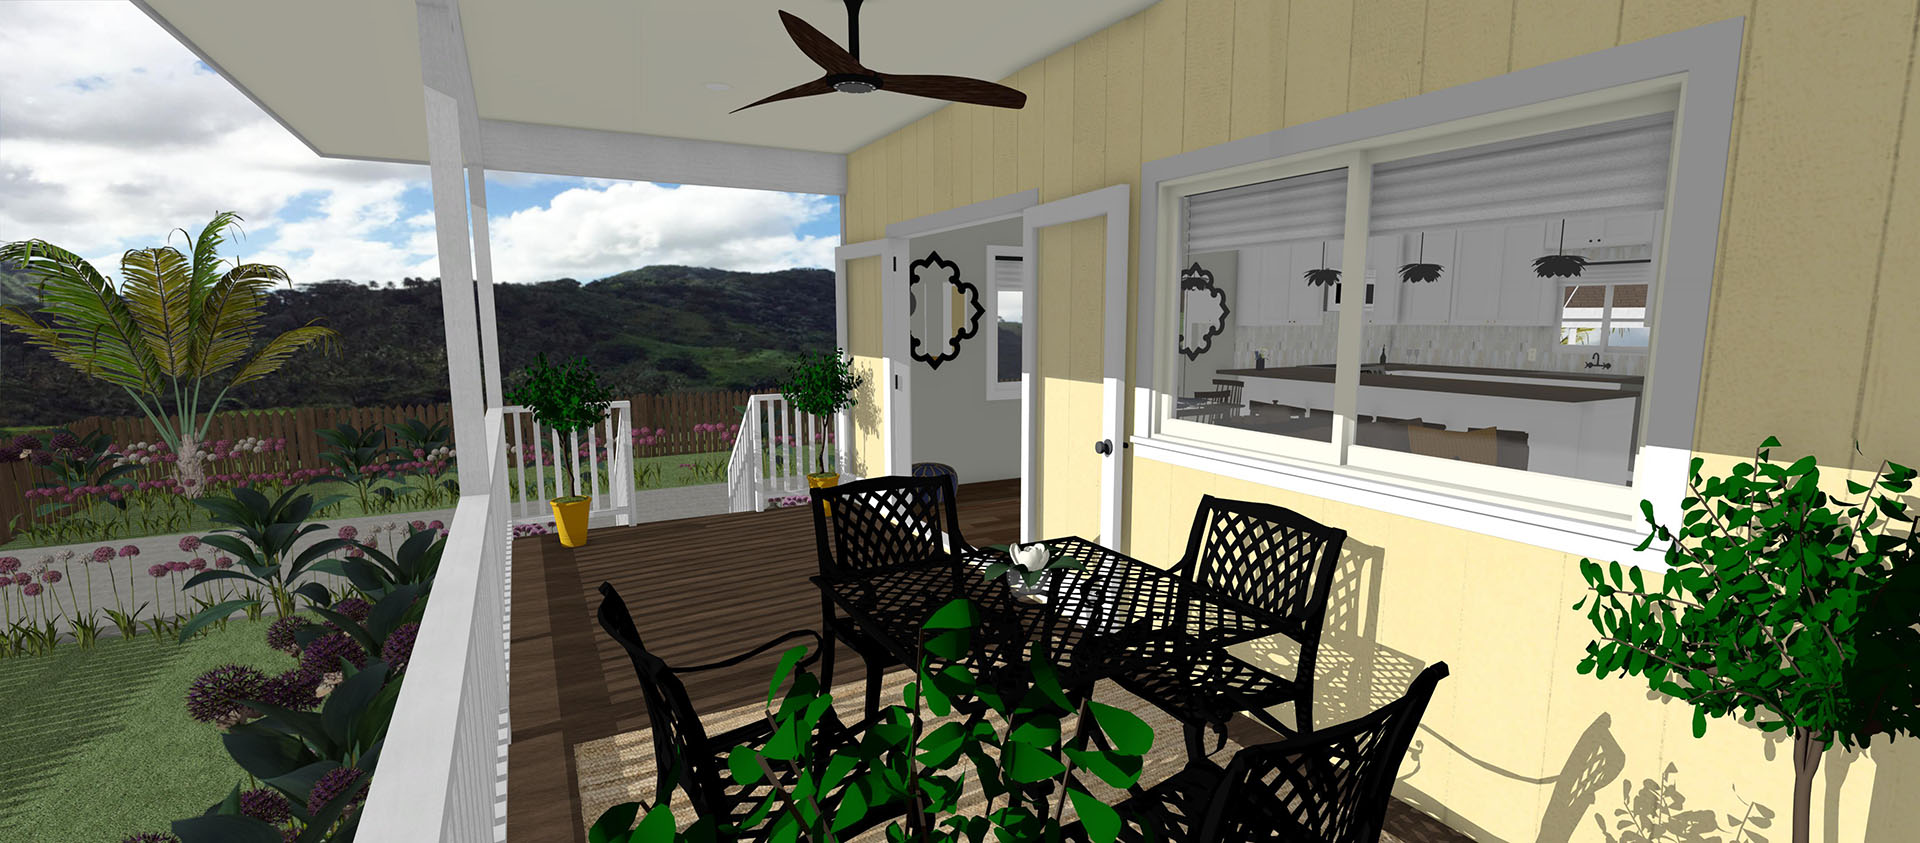 Exterior view of back porch with table and chairs